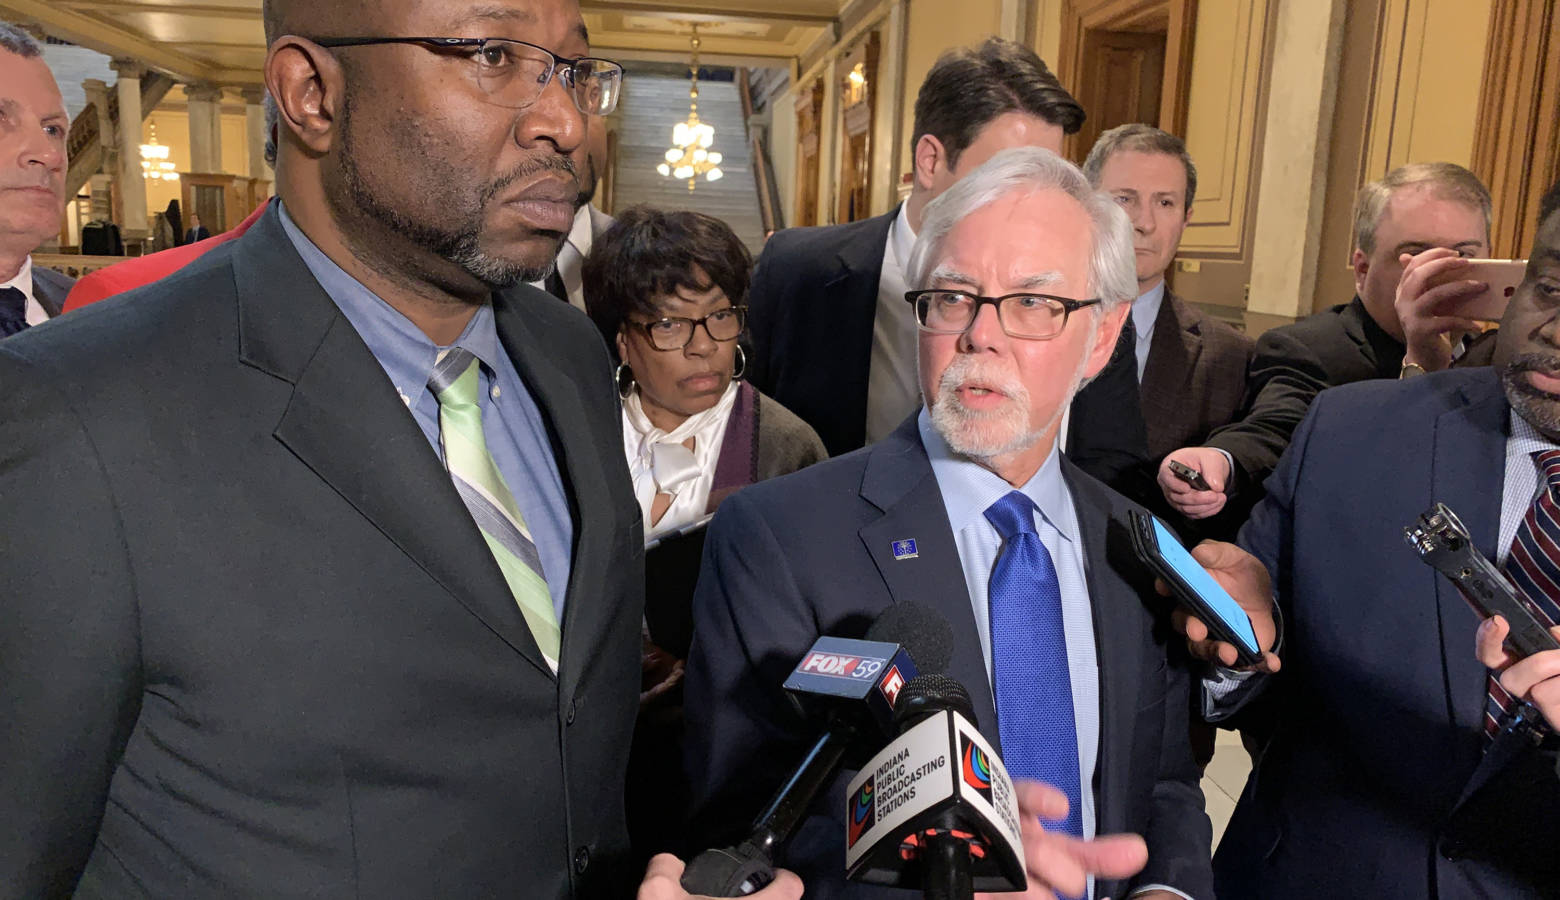 Sen. Greg Taylor (D-Indianapolis) and Sen. Tim Lanane (D-Anderson) discuss a change made to the hate crimes bill. (Brandon Smith/IPB News)